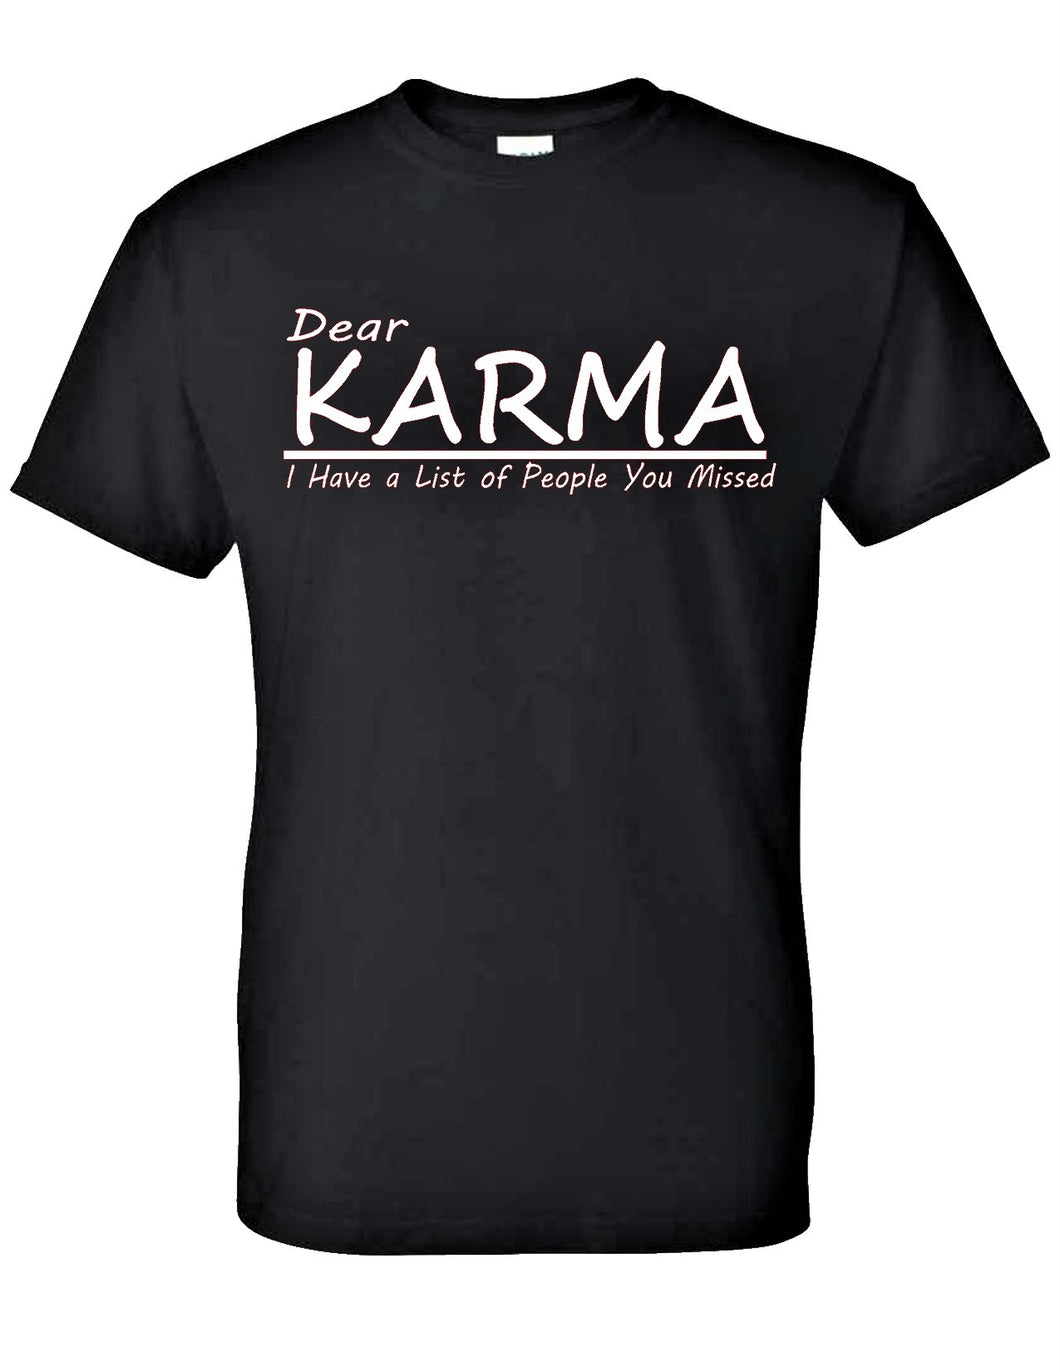 Karma i have a list of people you missed